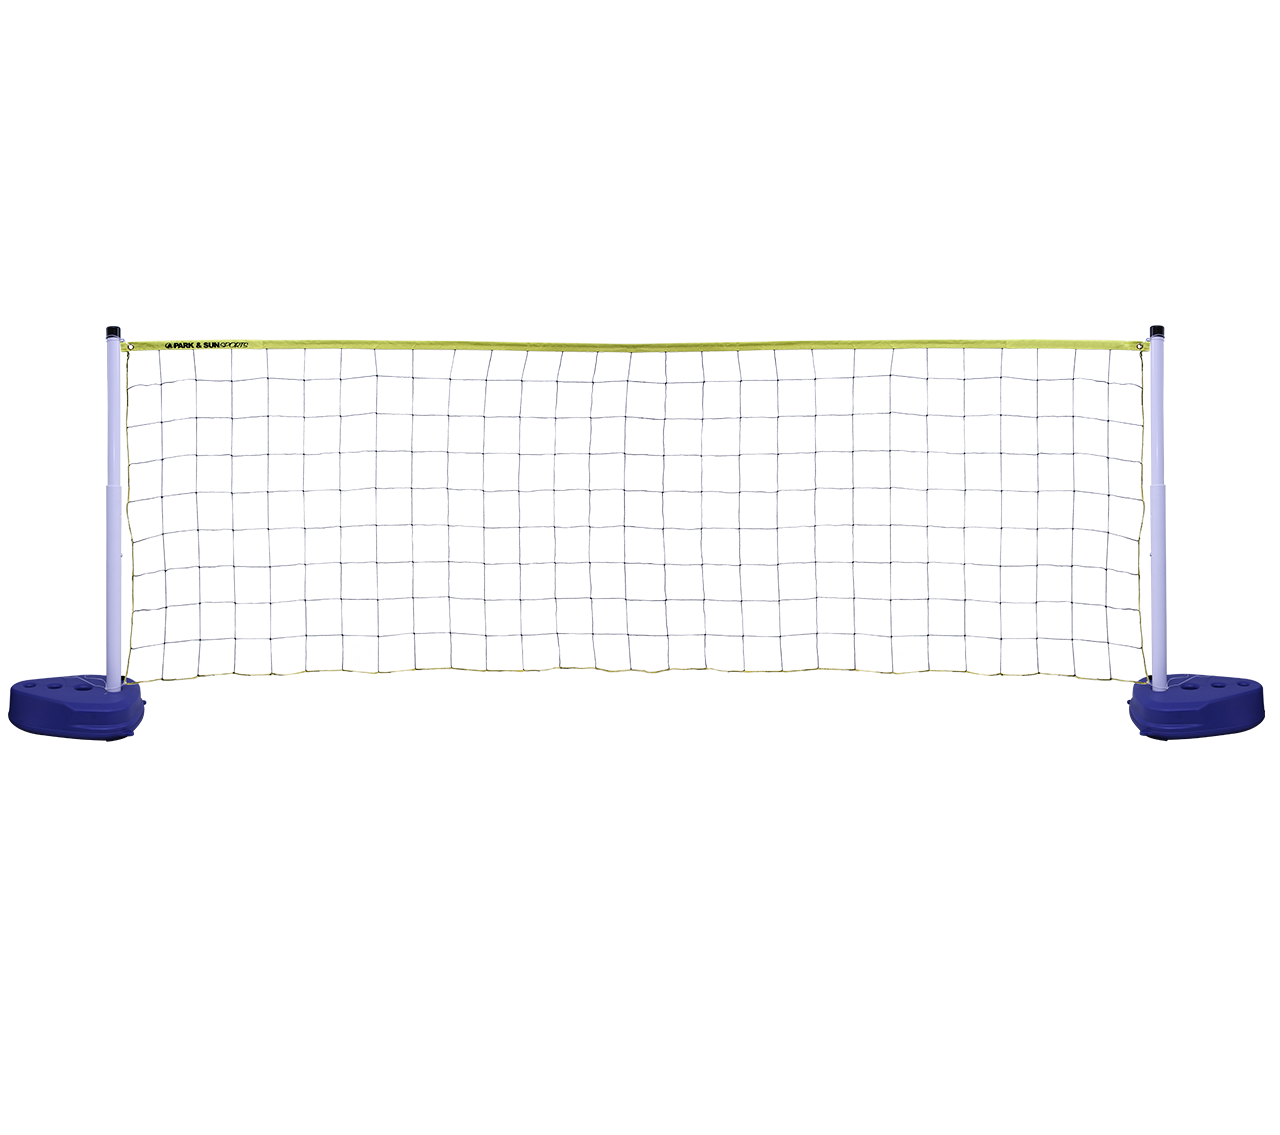 Park and Sports Pool Volleyball Net